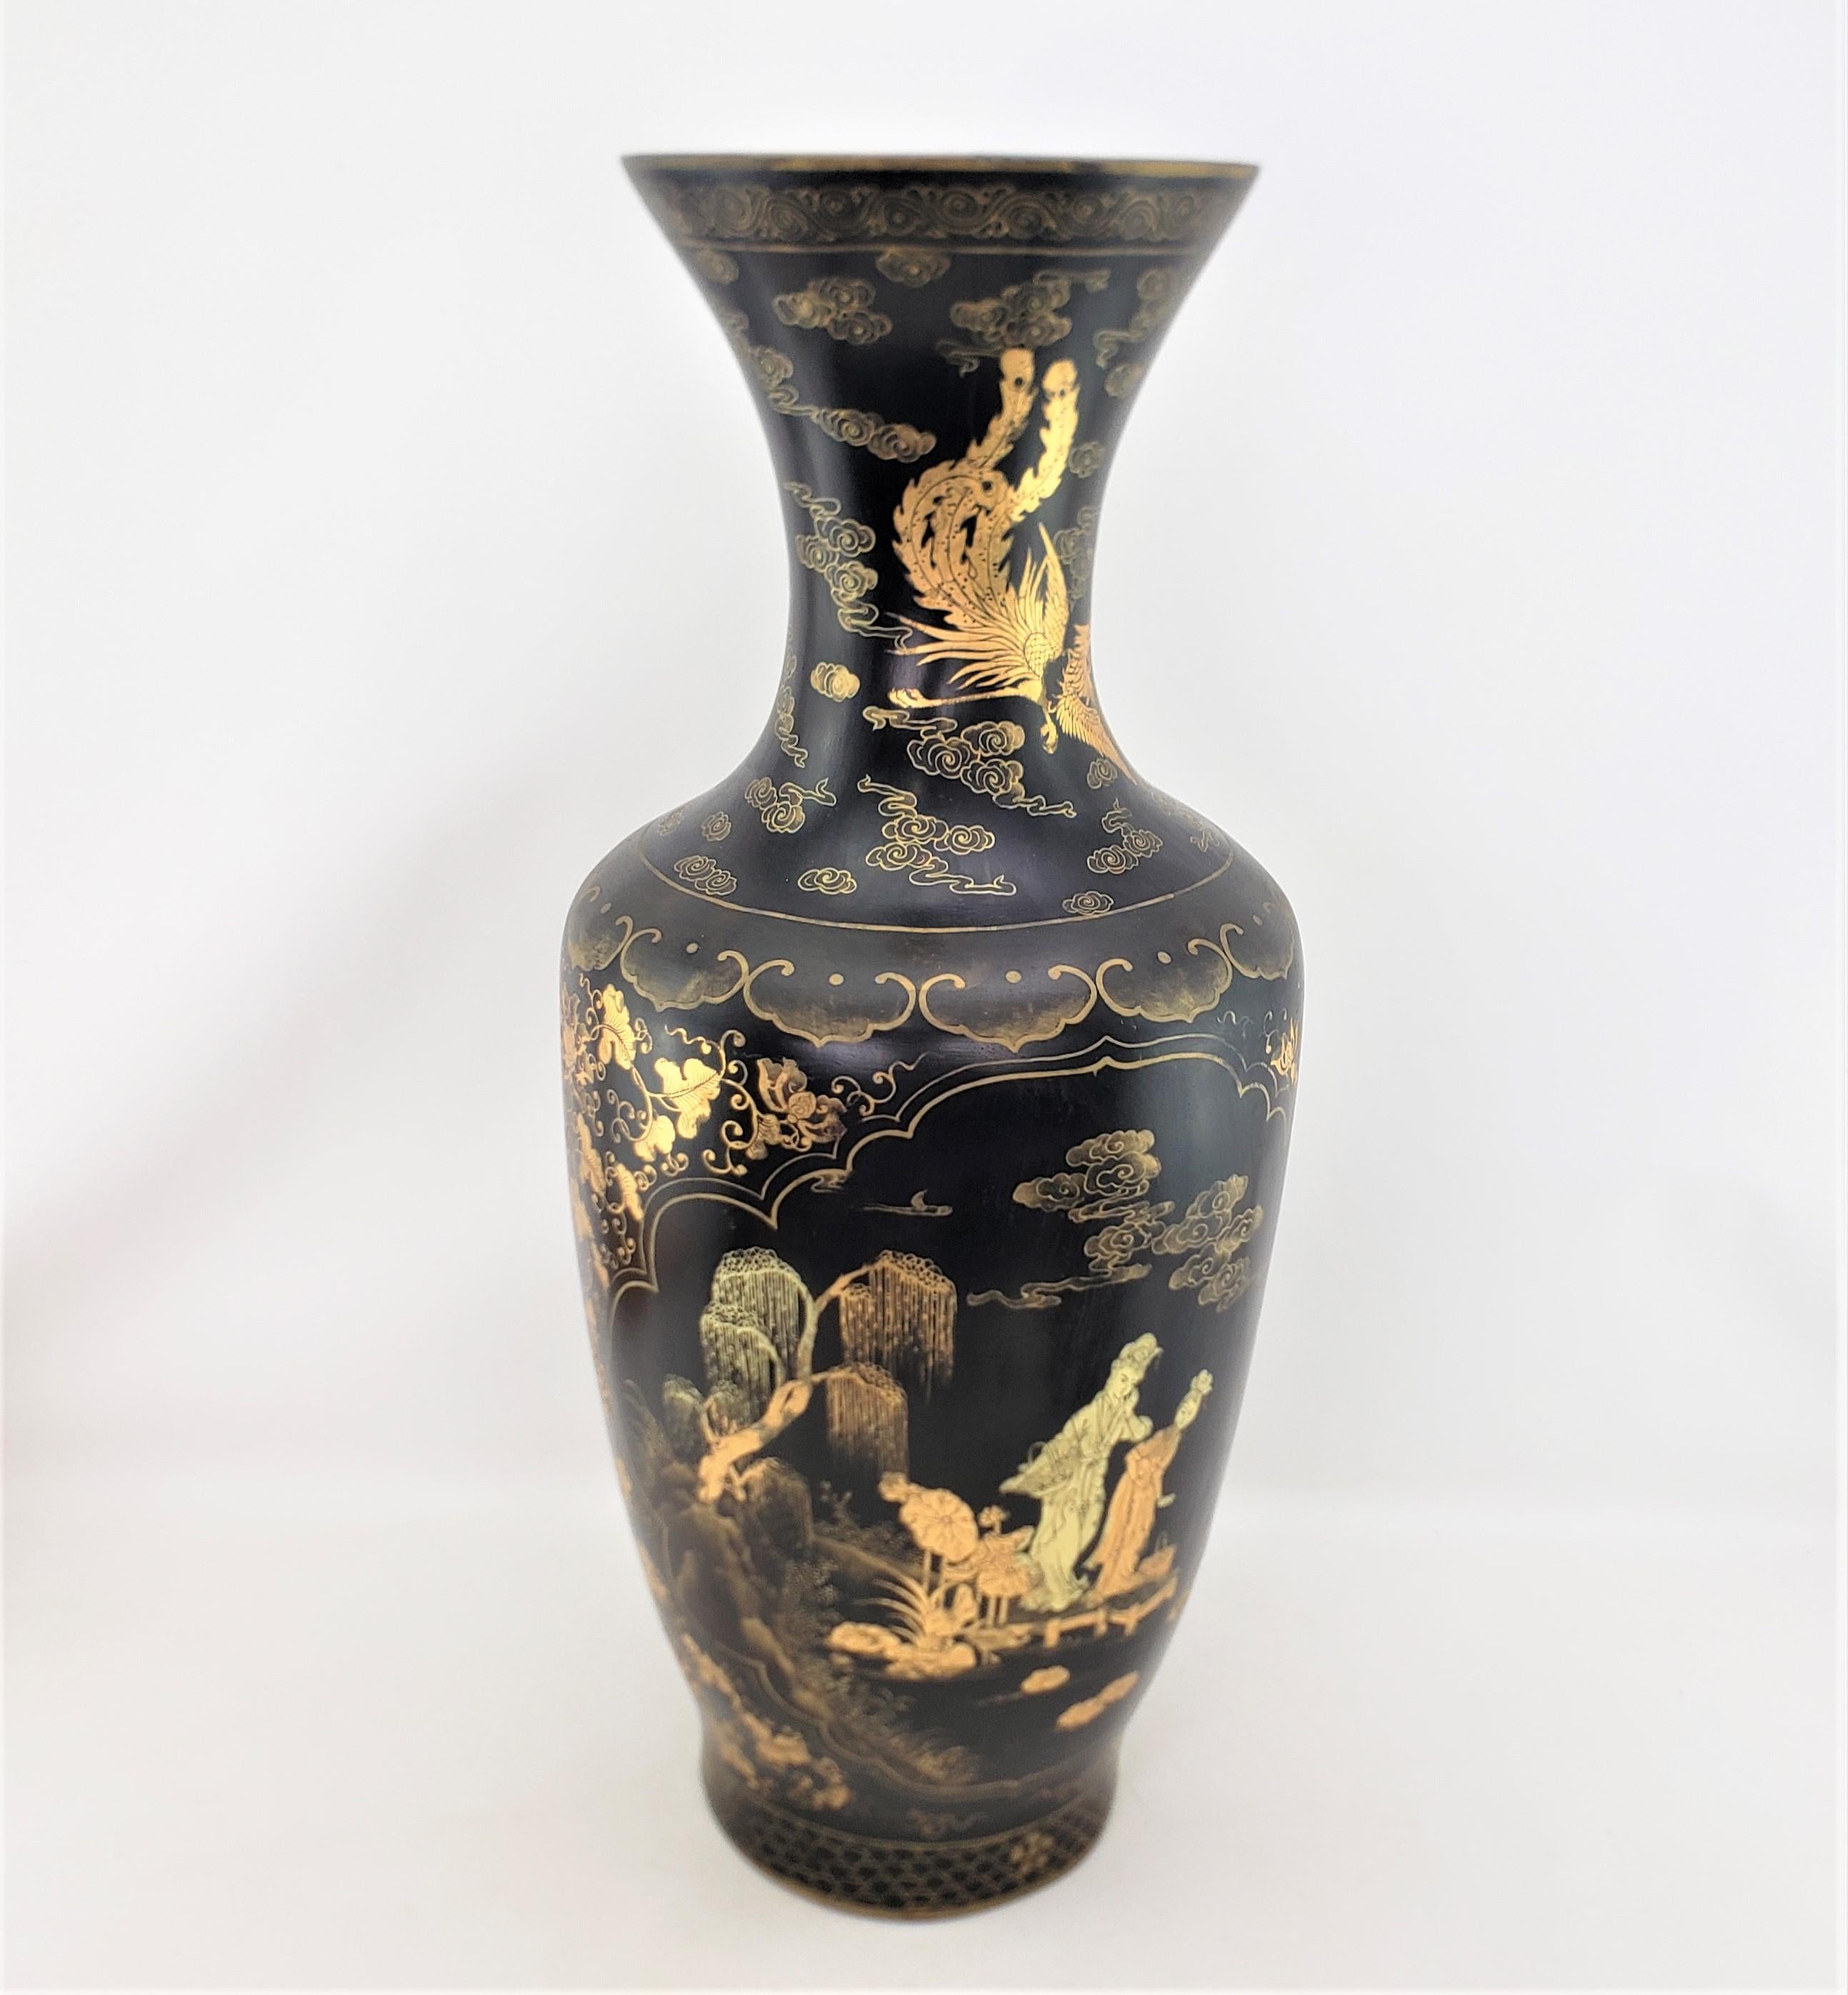 This large antique floor vase is unsigned, but presumed to have originated from China and date to approximately 1920 and done in a period Chinese Export style. The vase is composed of paper mache with a black lacquer ground with hand-painted gilt